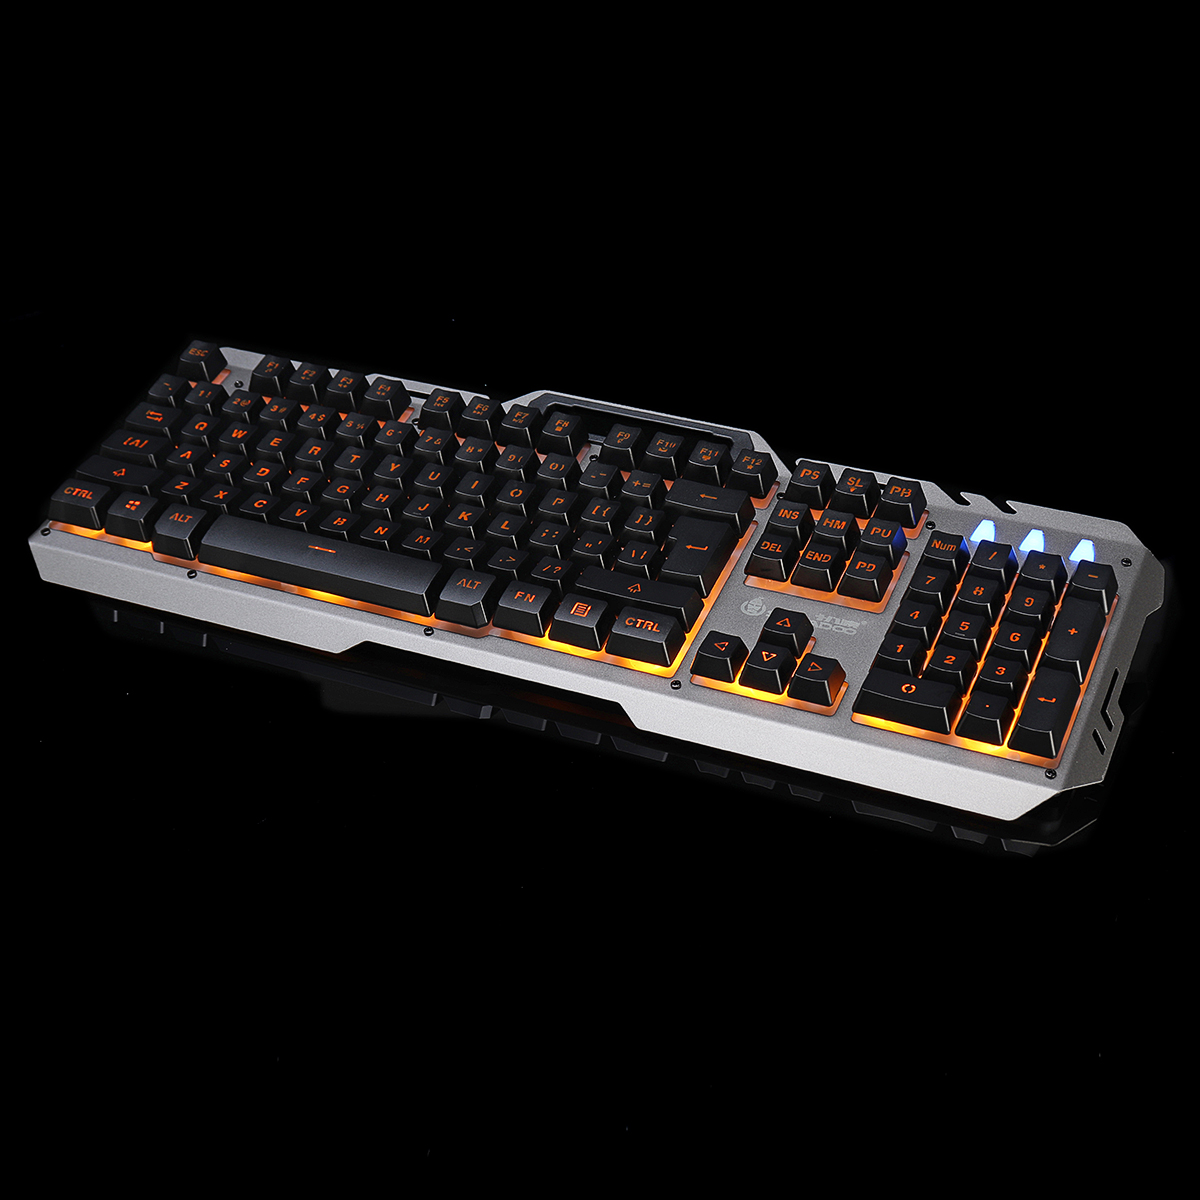 104 Key USB Wired Backlit Mechanical Handfeel Gaming Keyboard with Phone Support 8